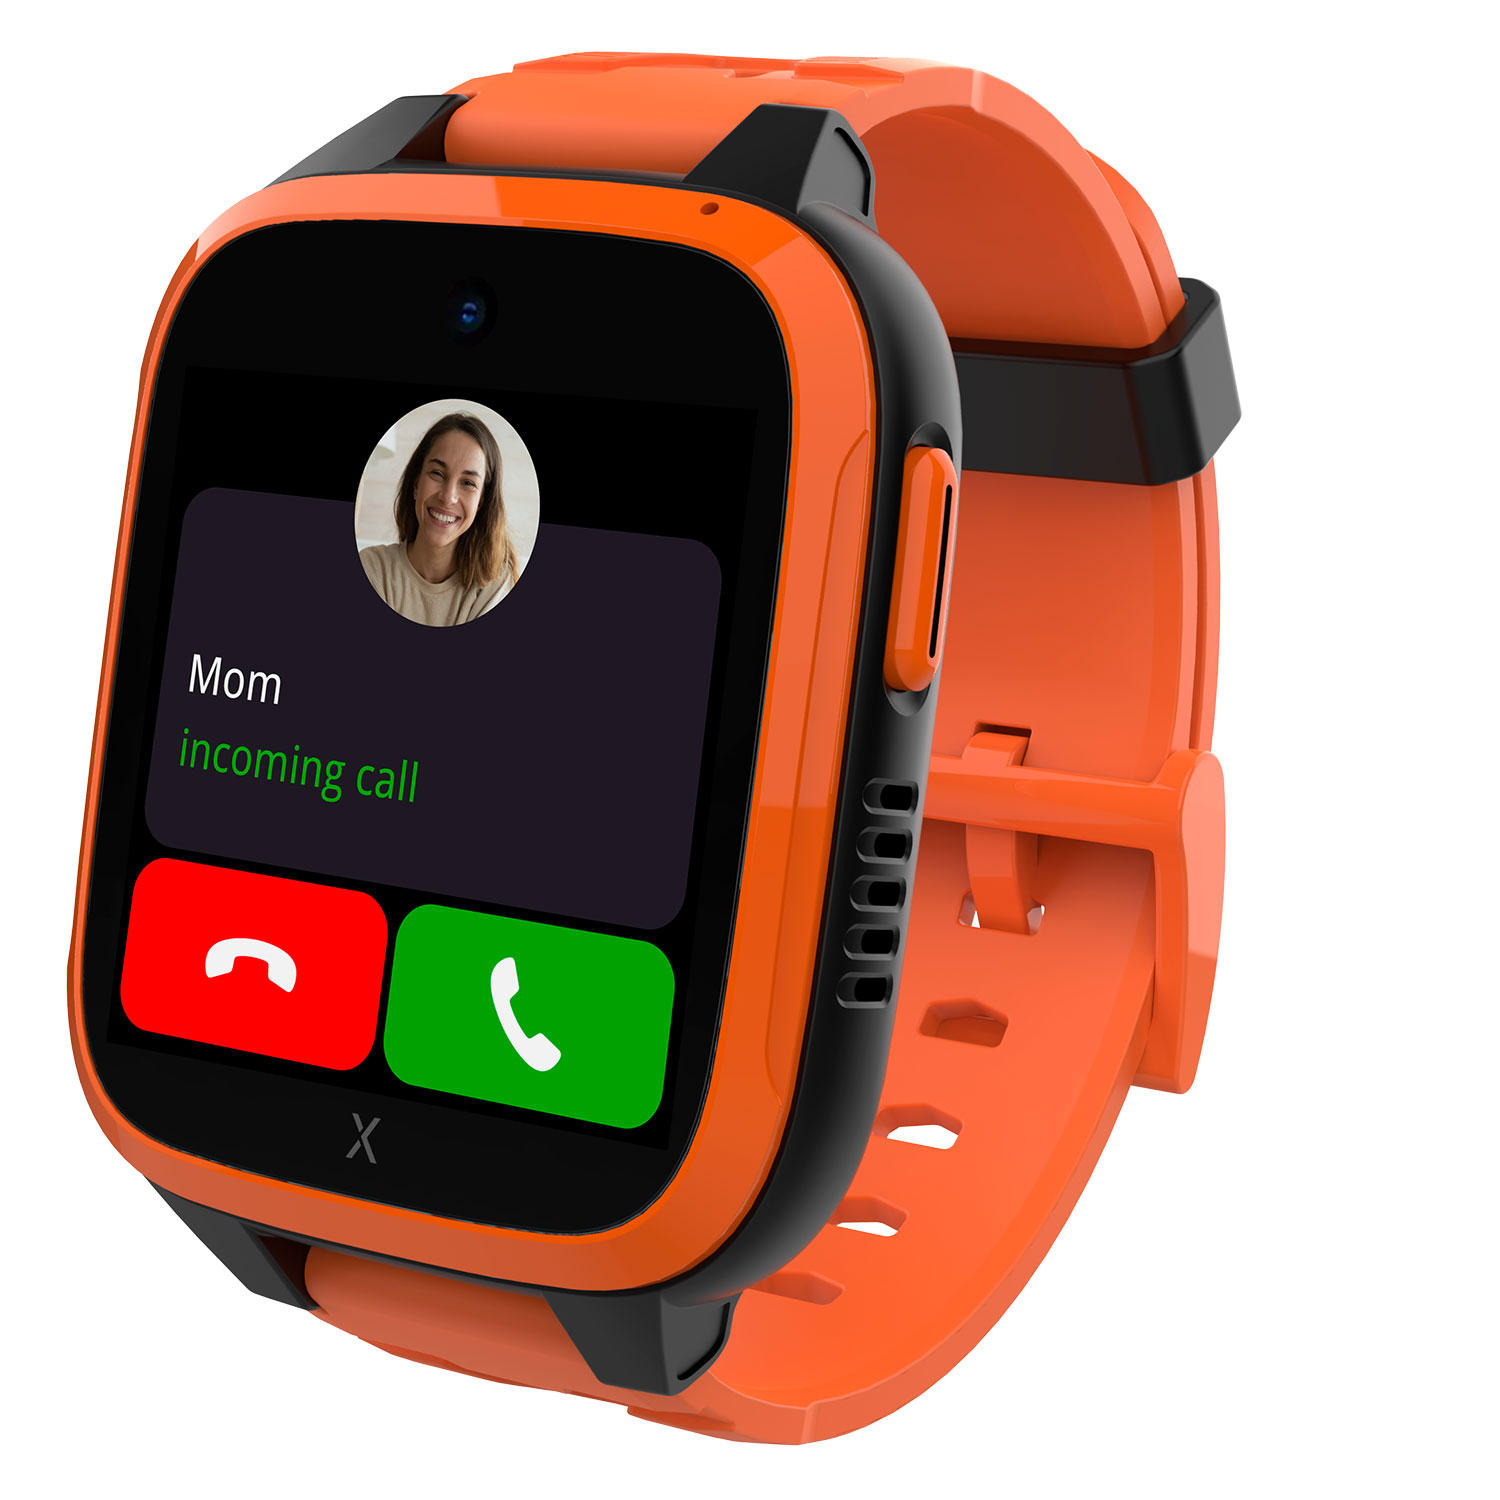 XGO3 Orange Kids Smart Watch Cell Phone with GPS and SIM Card Included - Orange